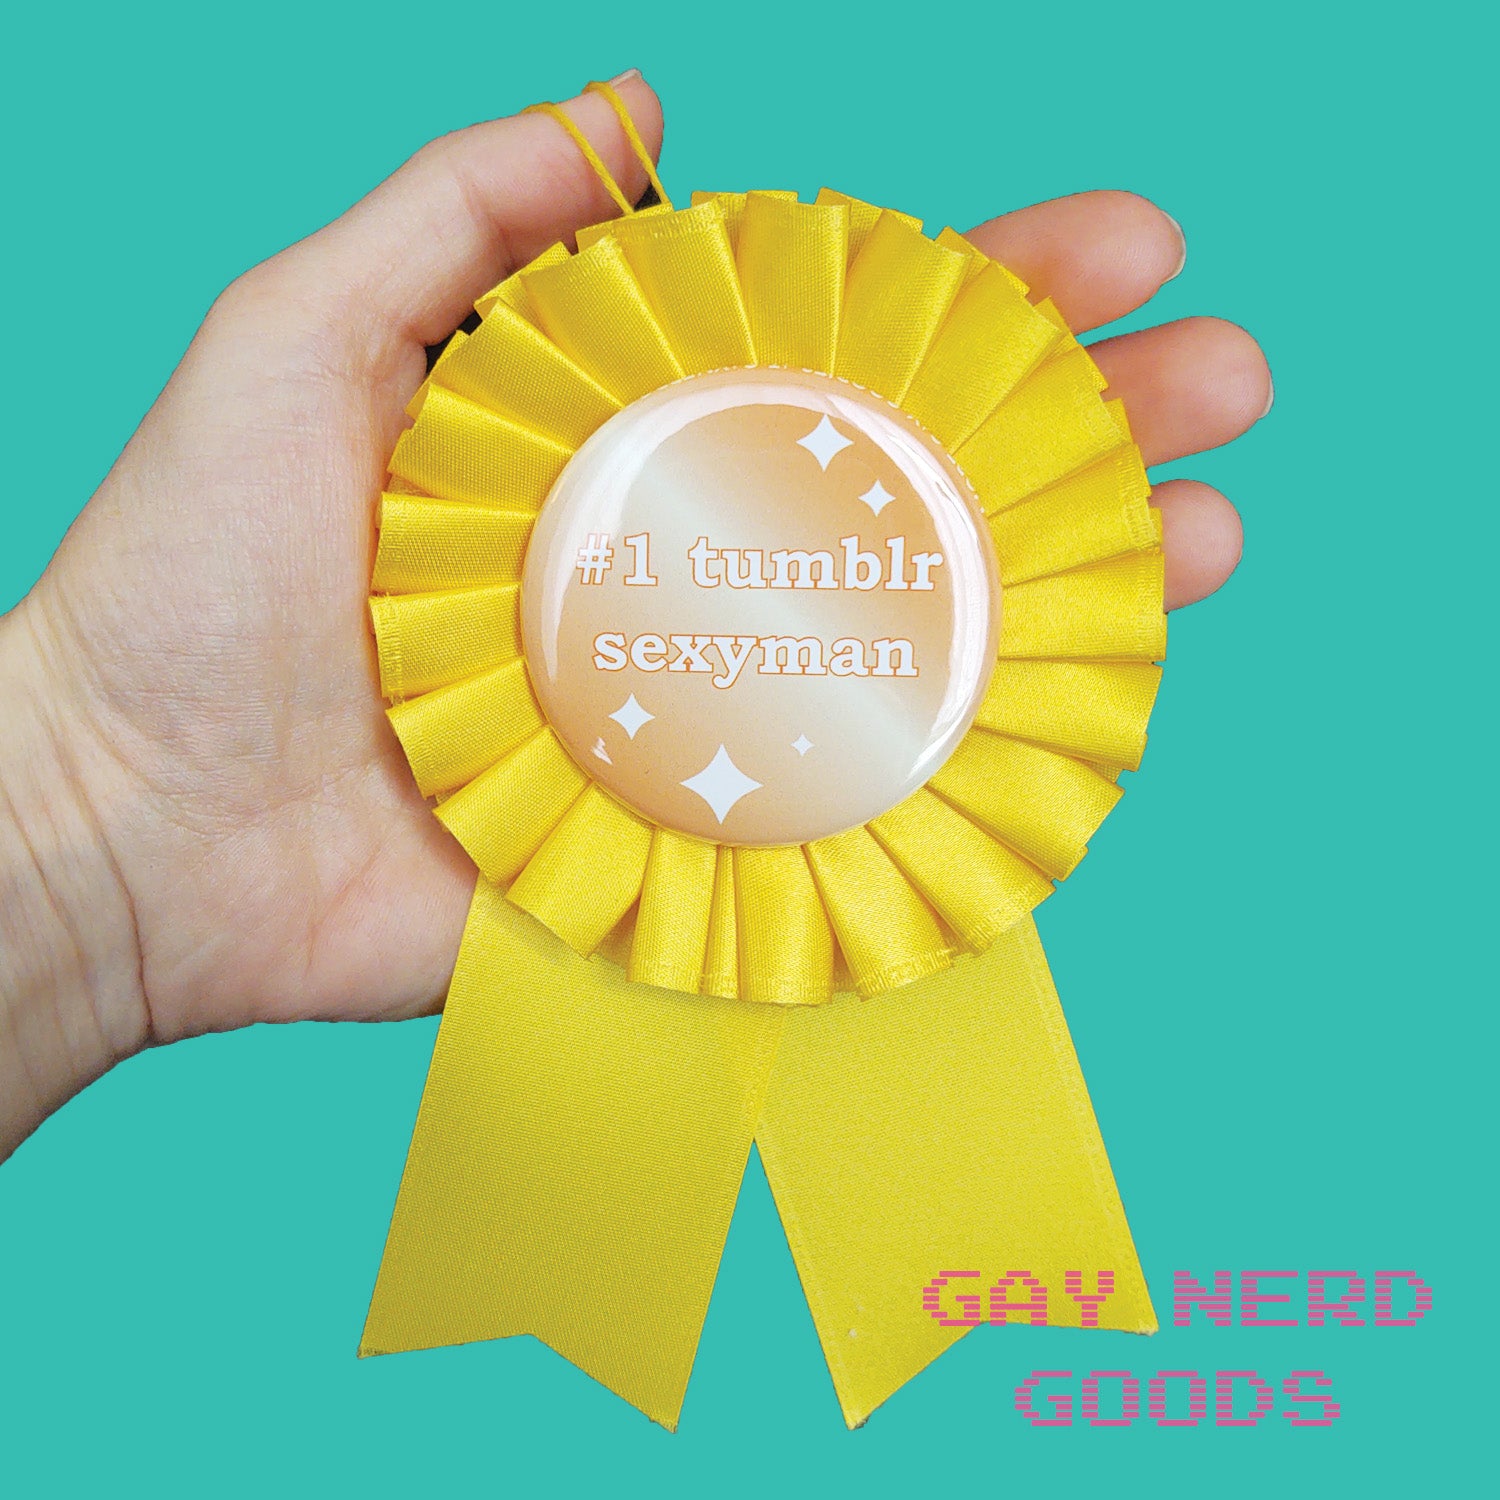 #1 tumblr sexyman award ribbon being held in a hand on a mint green background